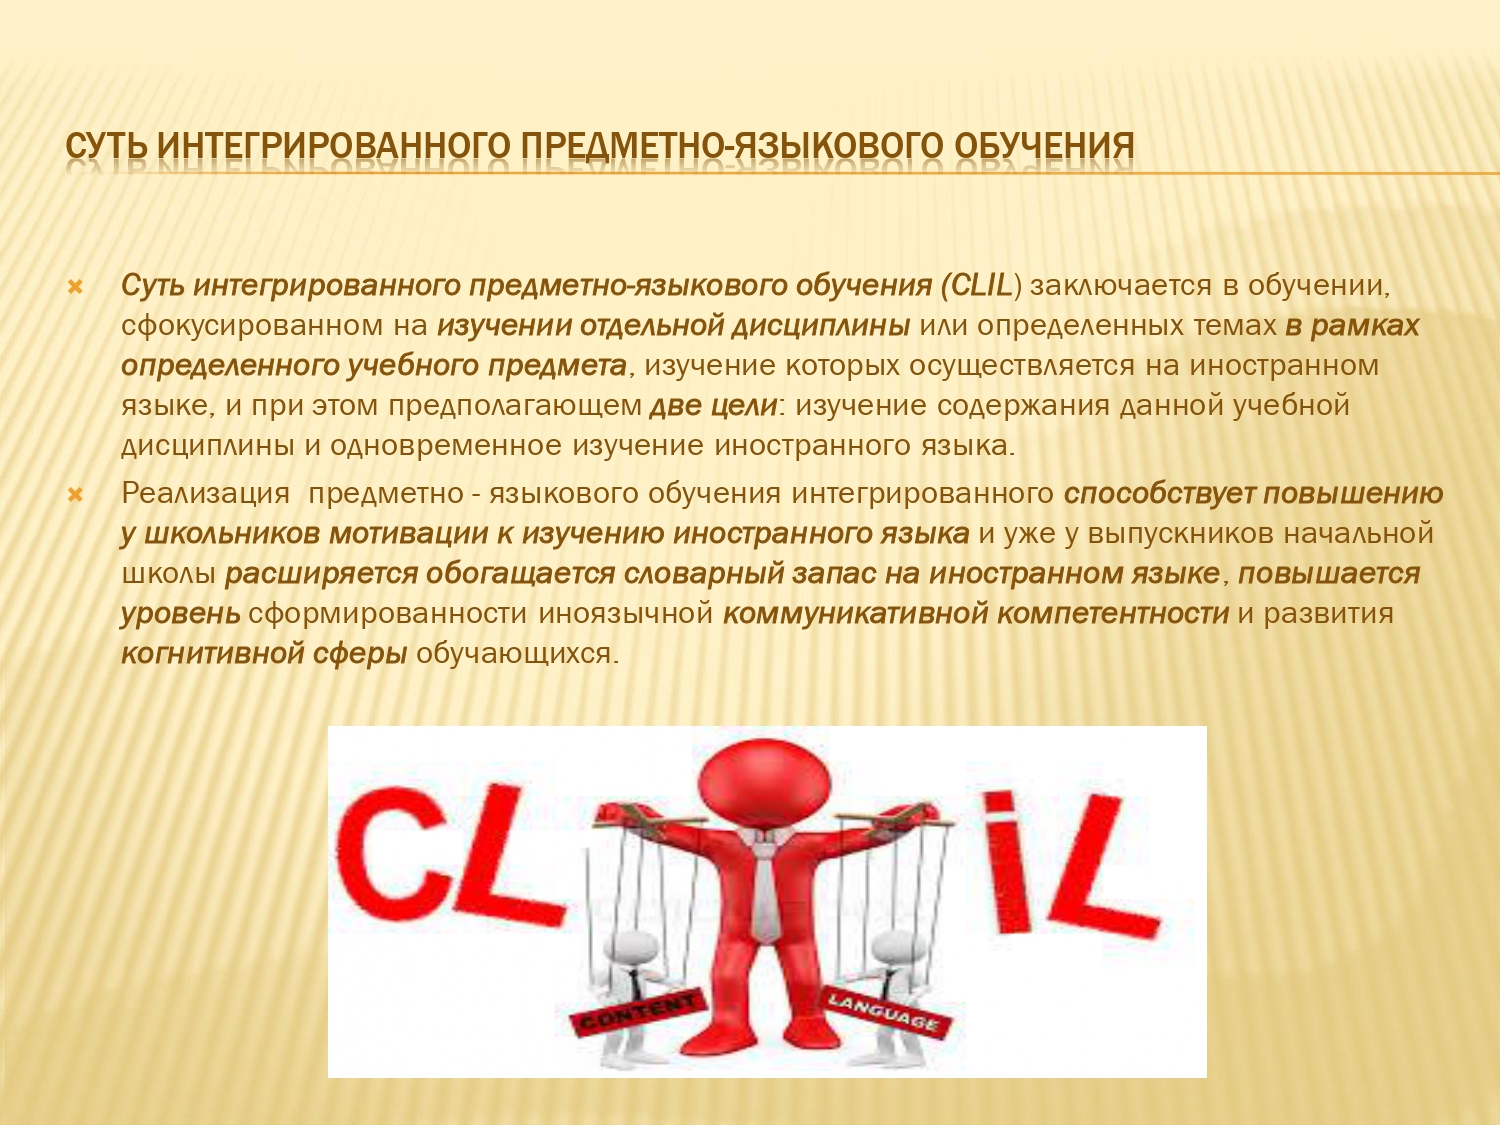 CLIL-презентация_pages-to-jpg-0002